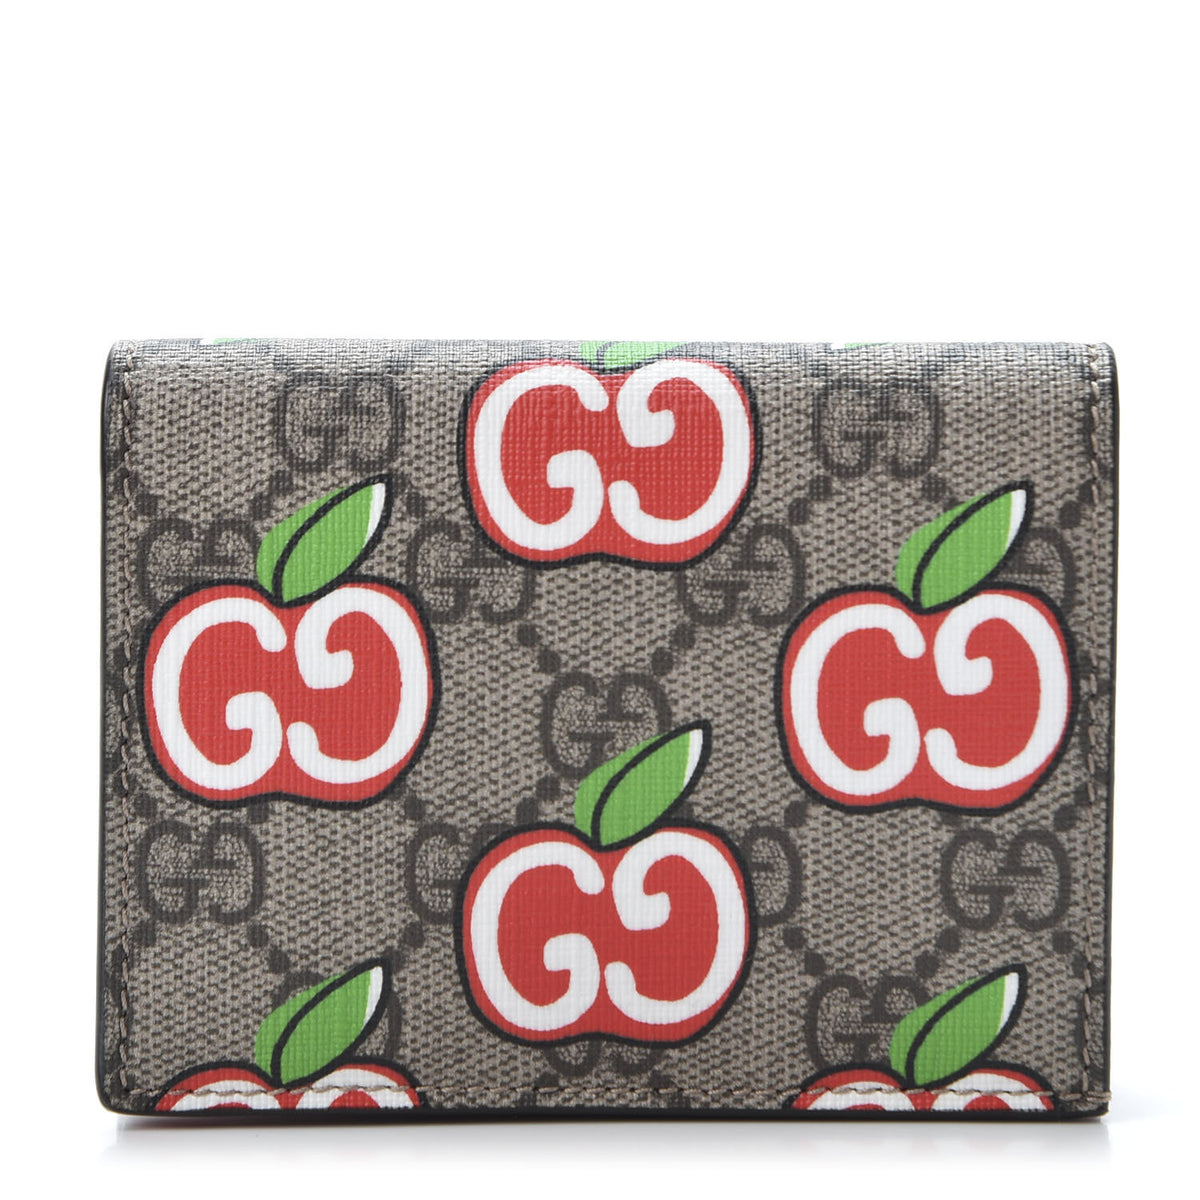 Gucci Rare Brand NEW Super Runway Limited Edition GG Apple Wallet